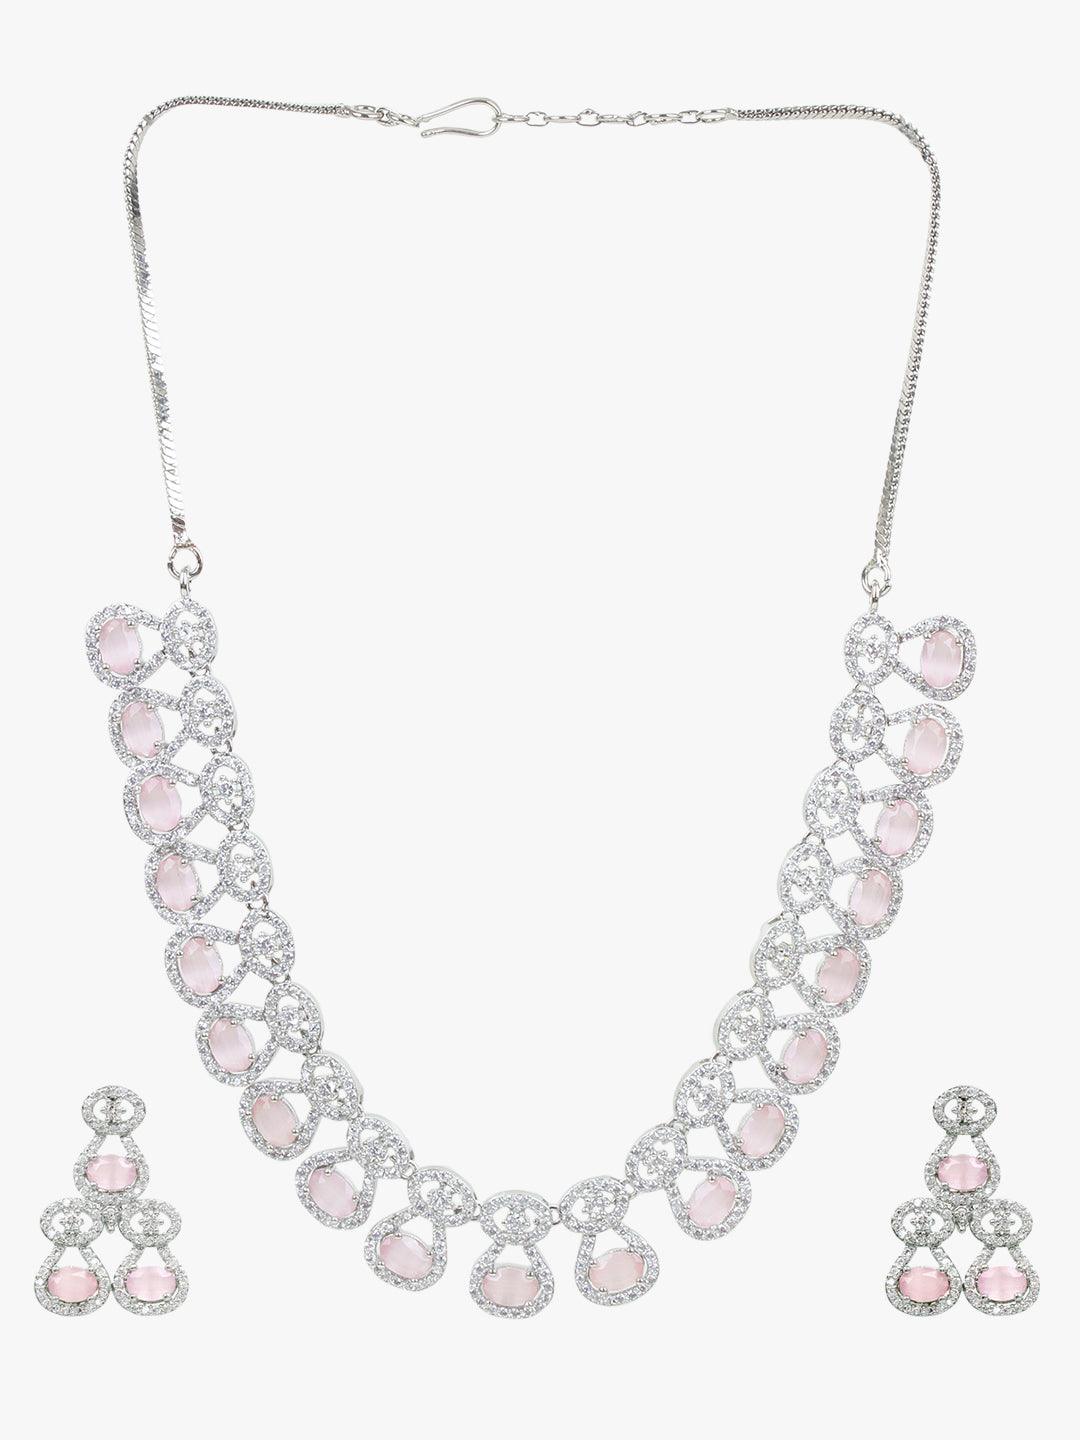 Elegant Crystal Necklace for a Timeless Look